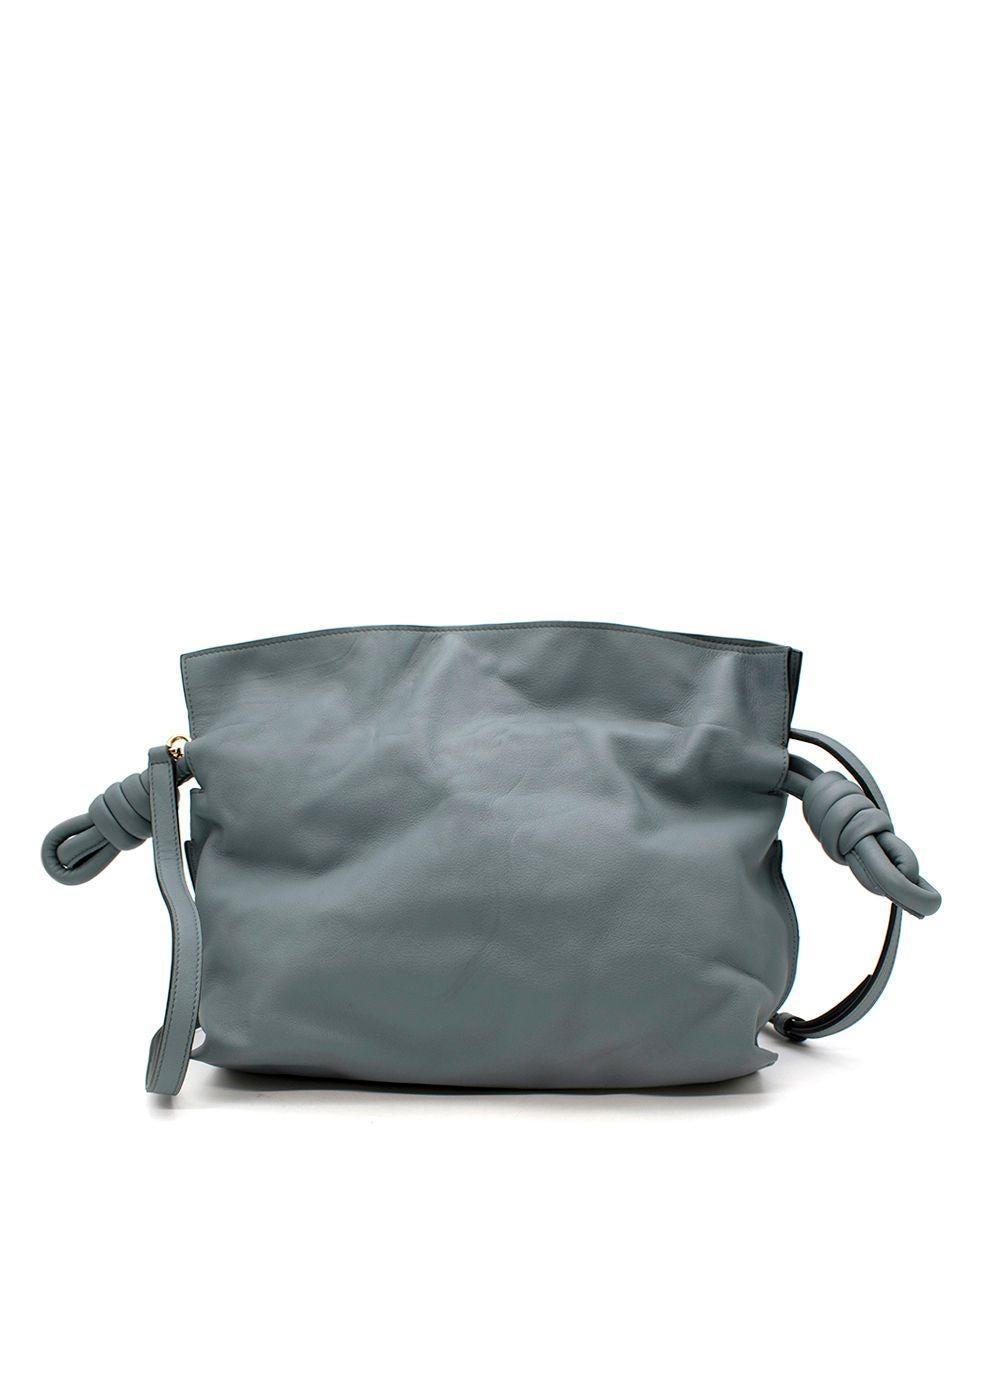 Loewe Grey-Blue Leather Flamenco Knot Bag

- Muted grey-blue hue
- Rectangular soft body, with drawstring top
- Chunky leather drawcords with decoratively knotted ends
- Shoulder strap
- Magnet closure
- Lined in twill

Materials:
Sheep skin

9.5